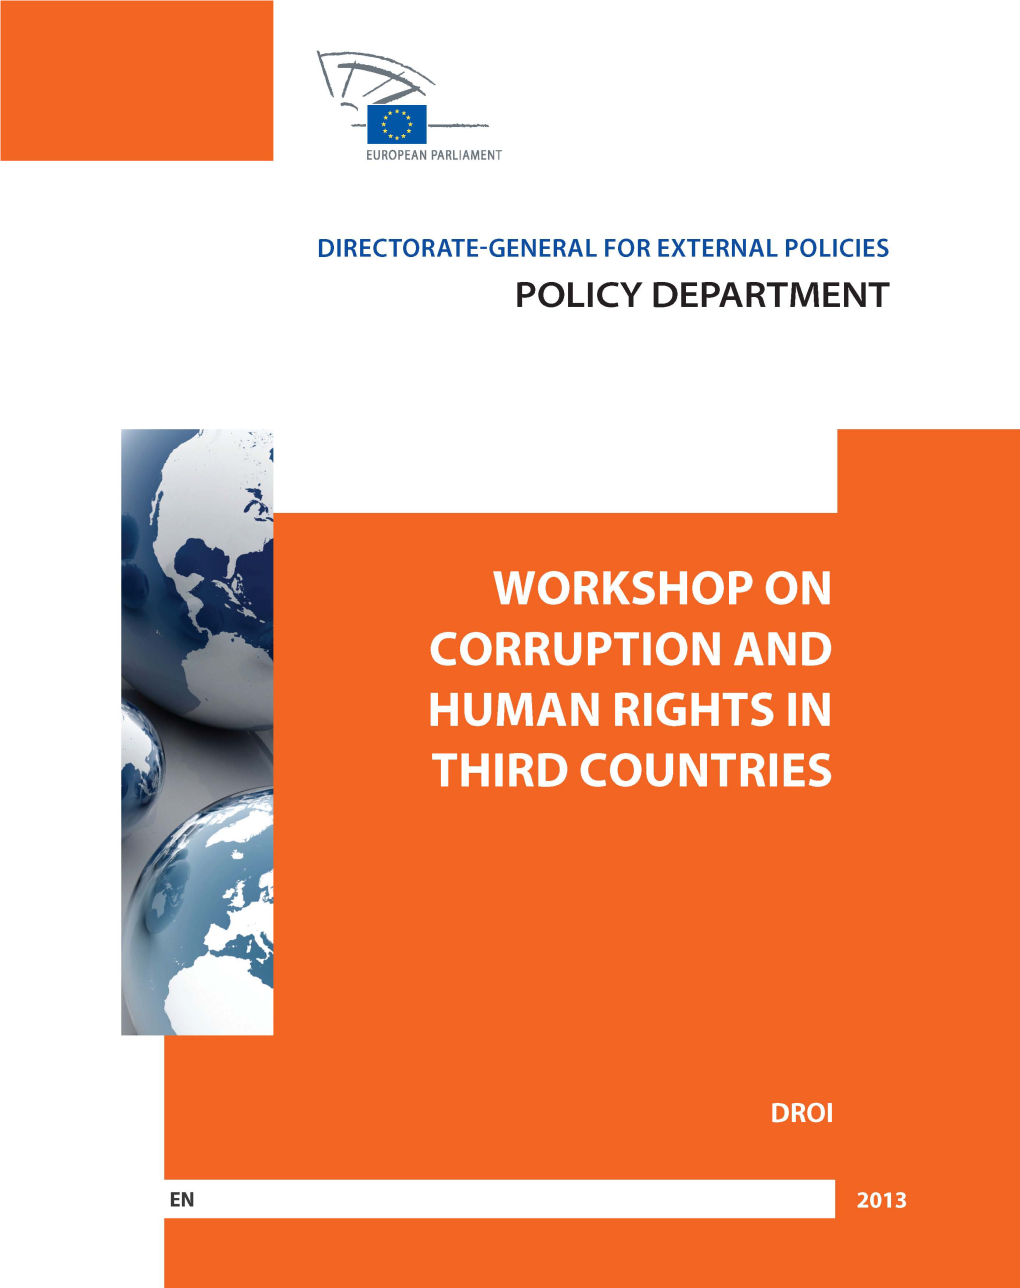 Workshop on Corruption and Human Rights in Third Countries